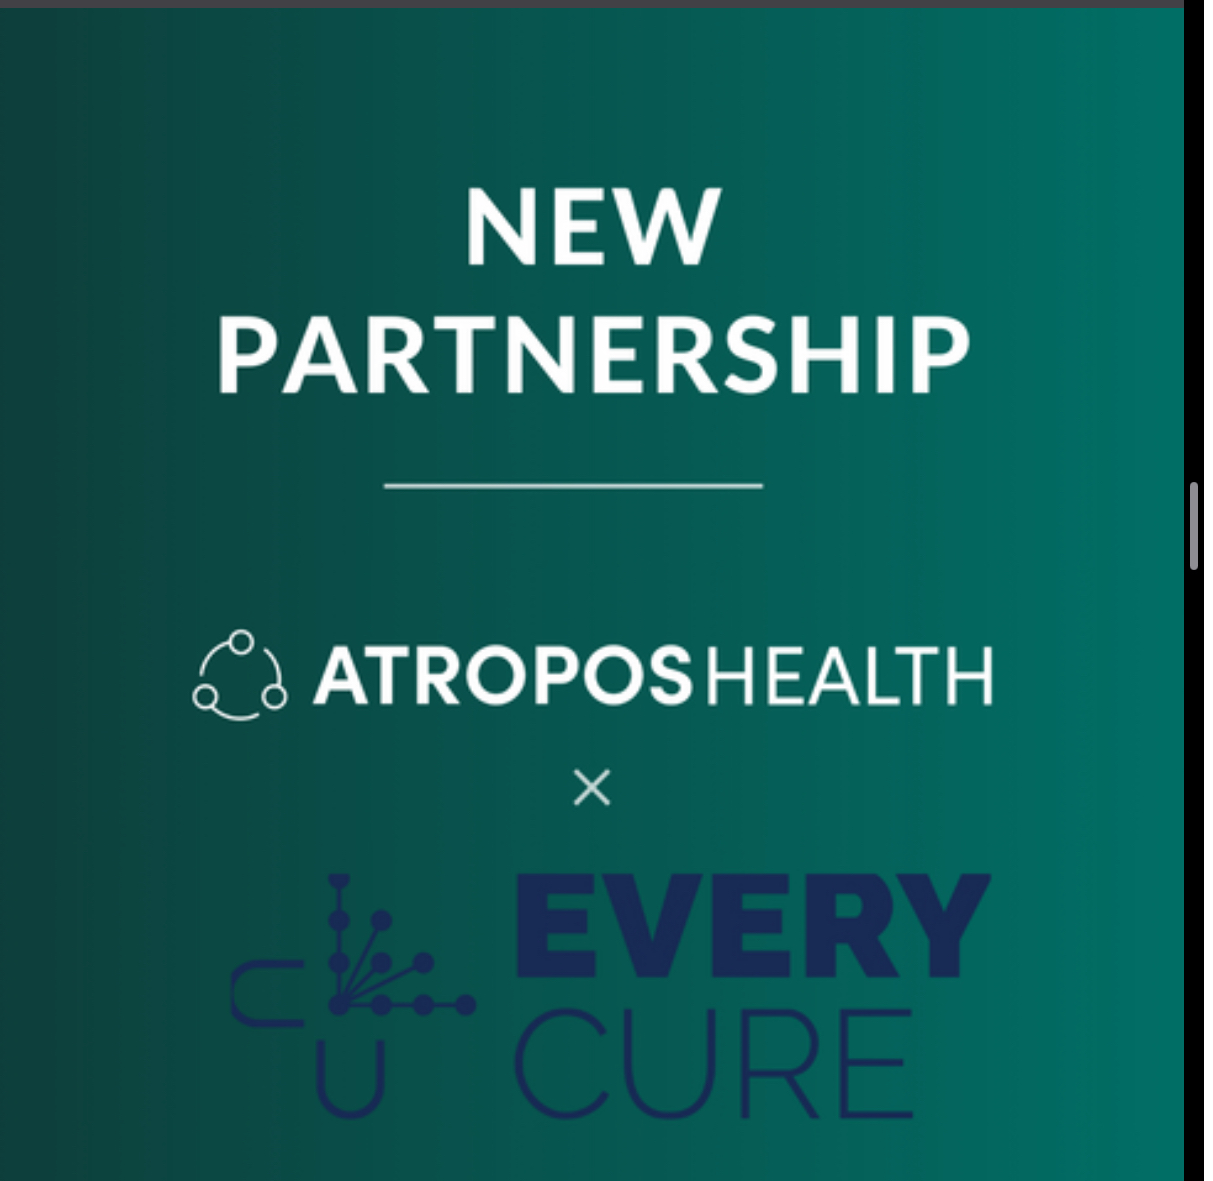 Atropos Health Partners With Every Cure: A New Lifeline For Underserved Populations Via Streamlined Drug Repurposing